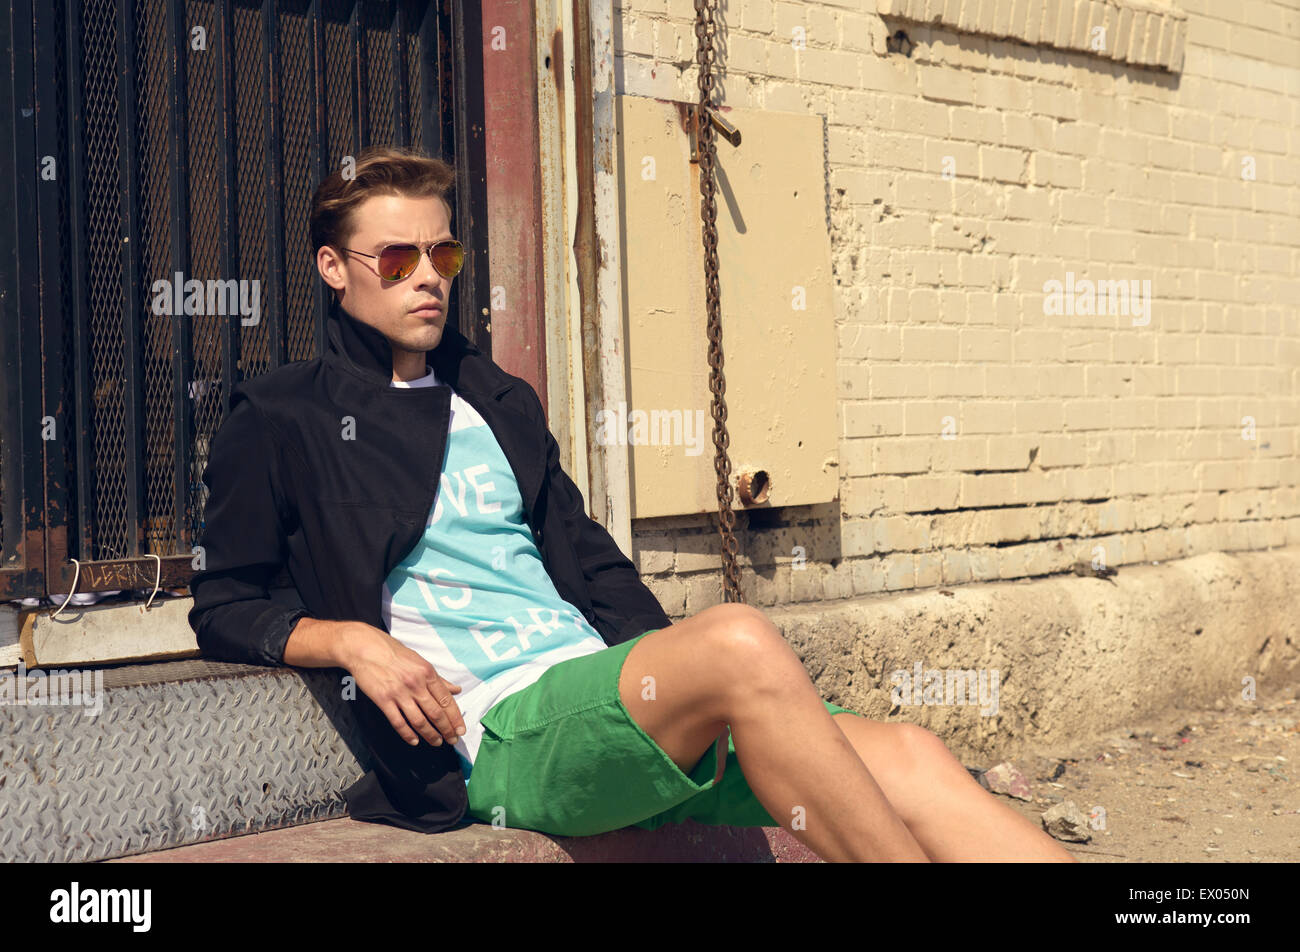 A Caucasian man, male model wearing sunglasses, sitting on a staircase step, leaning back and relaxing. A men's fashion editorial concept. Stock Photo